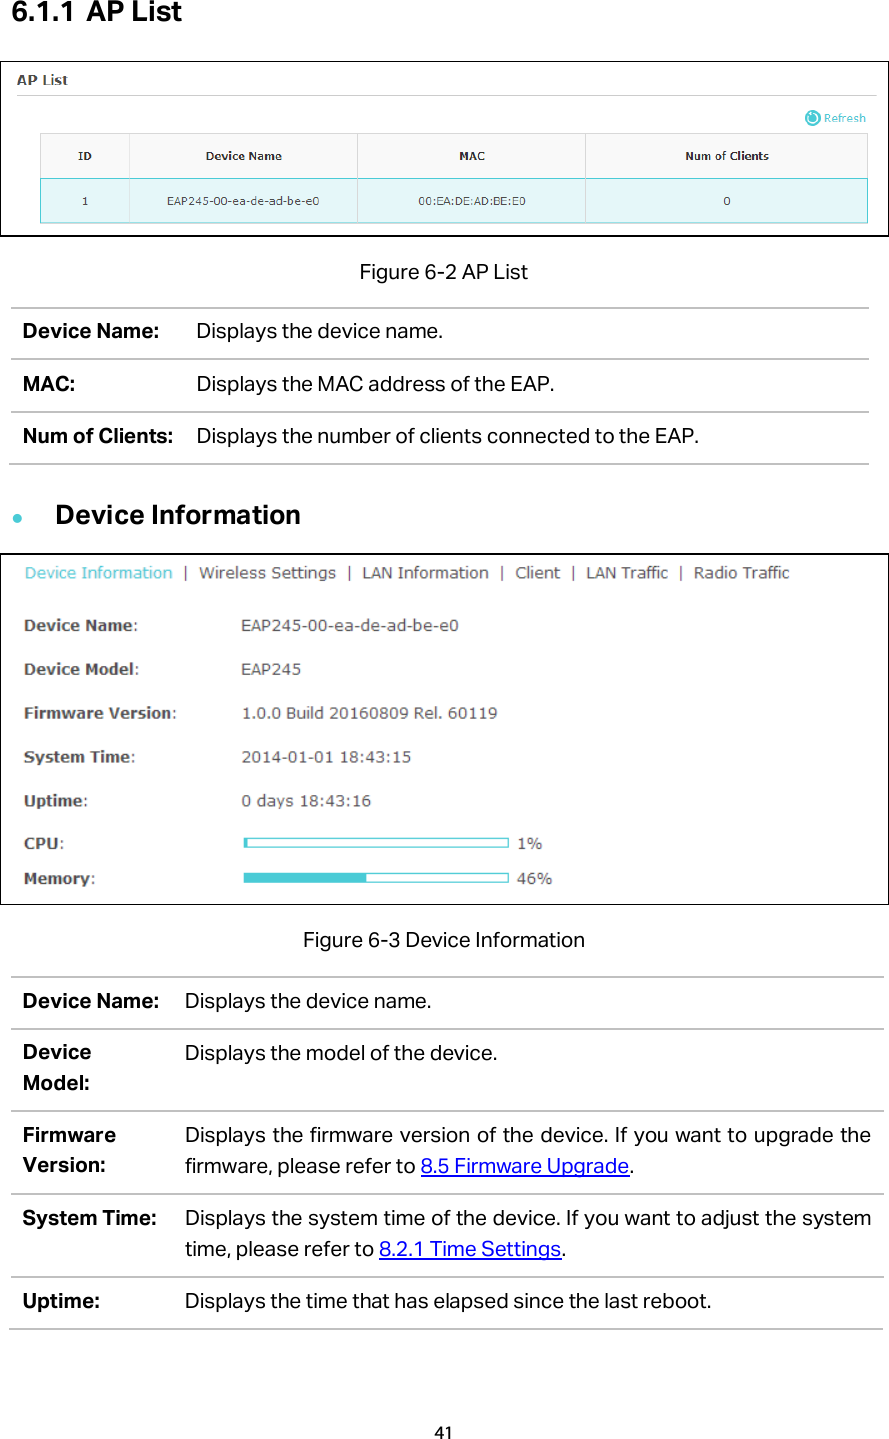 6.1.1 AP List    Figure 6-2 AP List Device Name: Displays the device name.   MAC: Displays the MAC address of the EAP. Num of Clients: Displays the number of clients connected to the EAP.  Device Information  Figure 6-3 Device Information Device Name: Displays the device name.   Device Model: Displays the model of the device. Firmware Version: Displays the firmware version of the device. If you want to upgrade the firmware, please refer to 8.5 Firmware Upgrade. System Time: Displays the system time of the device. If you want to adjust the system time, please refer to 8.2.1 Time Settings. Uptime: Displays the time that has elapsed since the last reboot. 41  